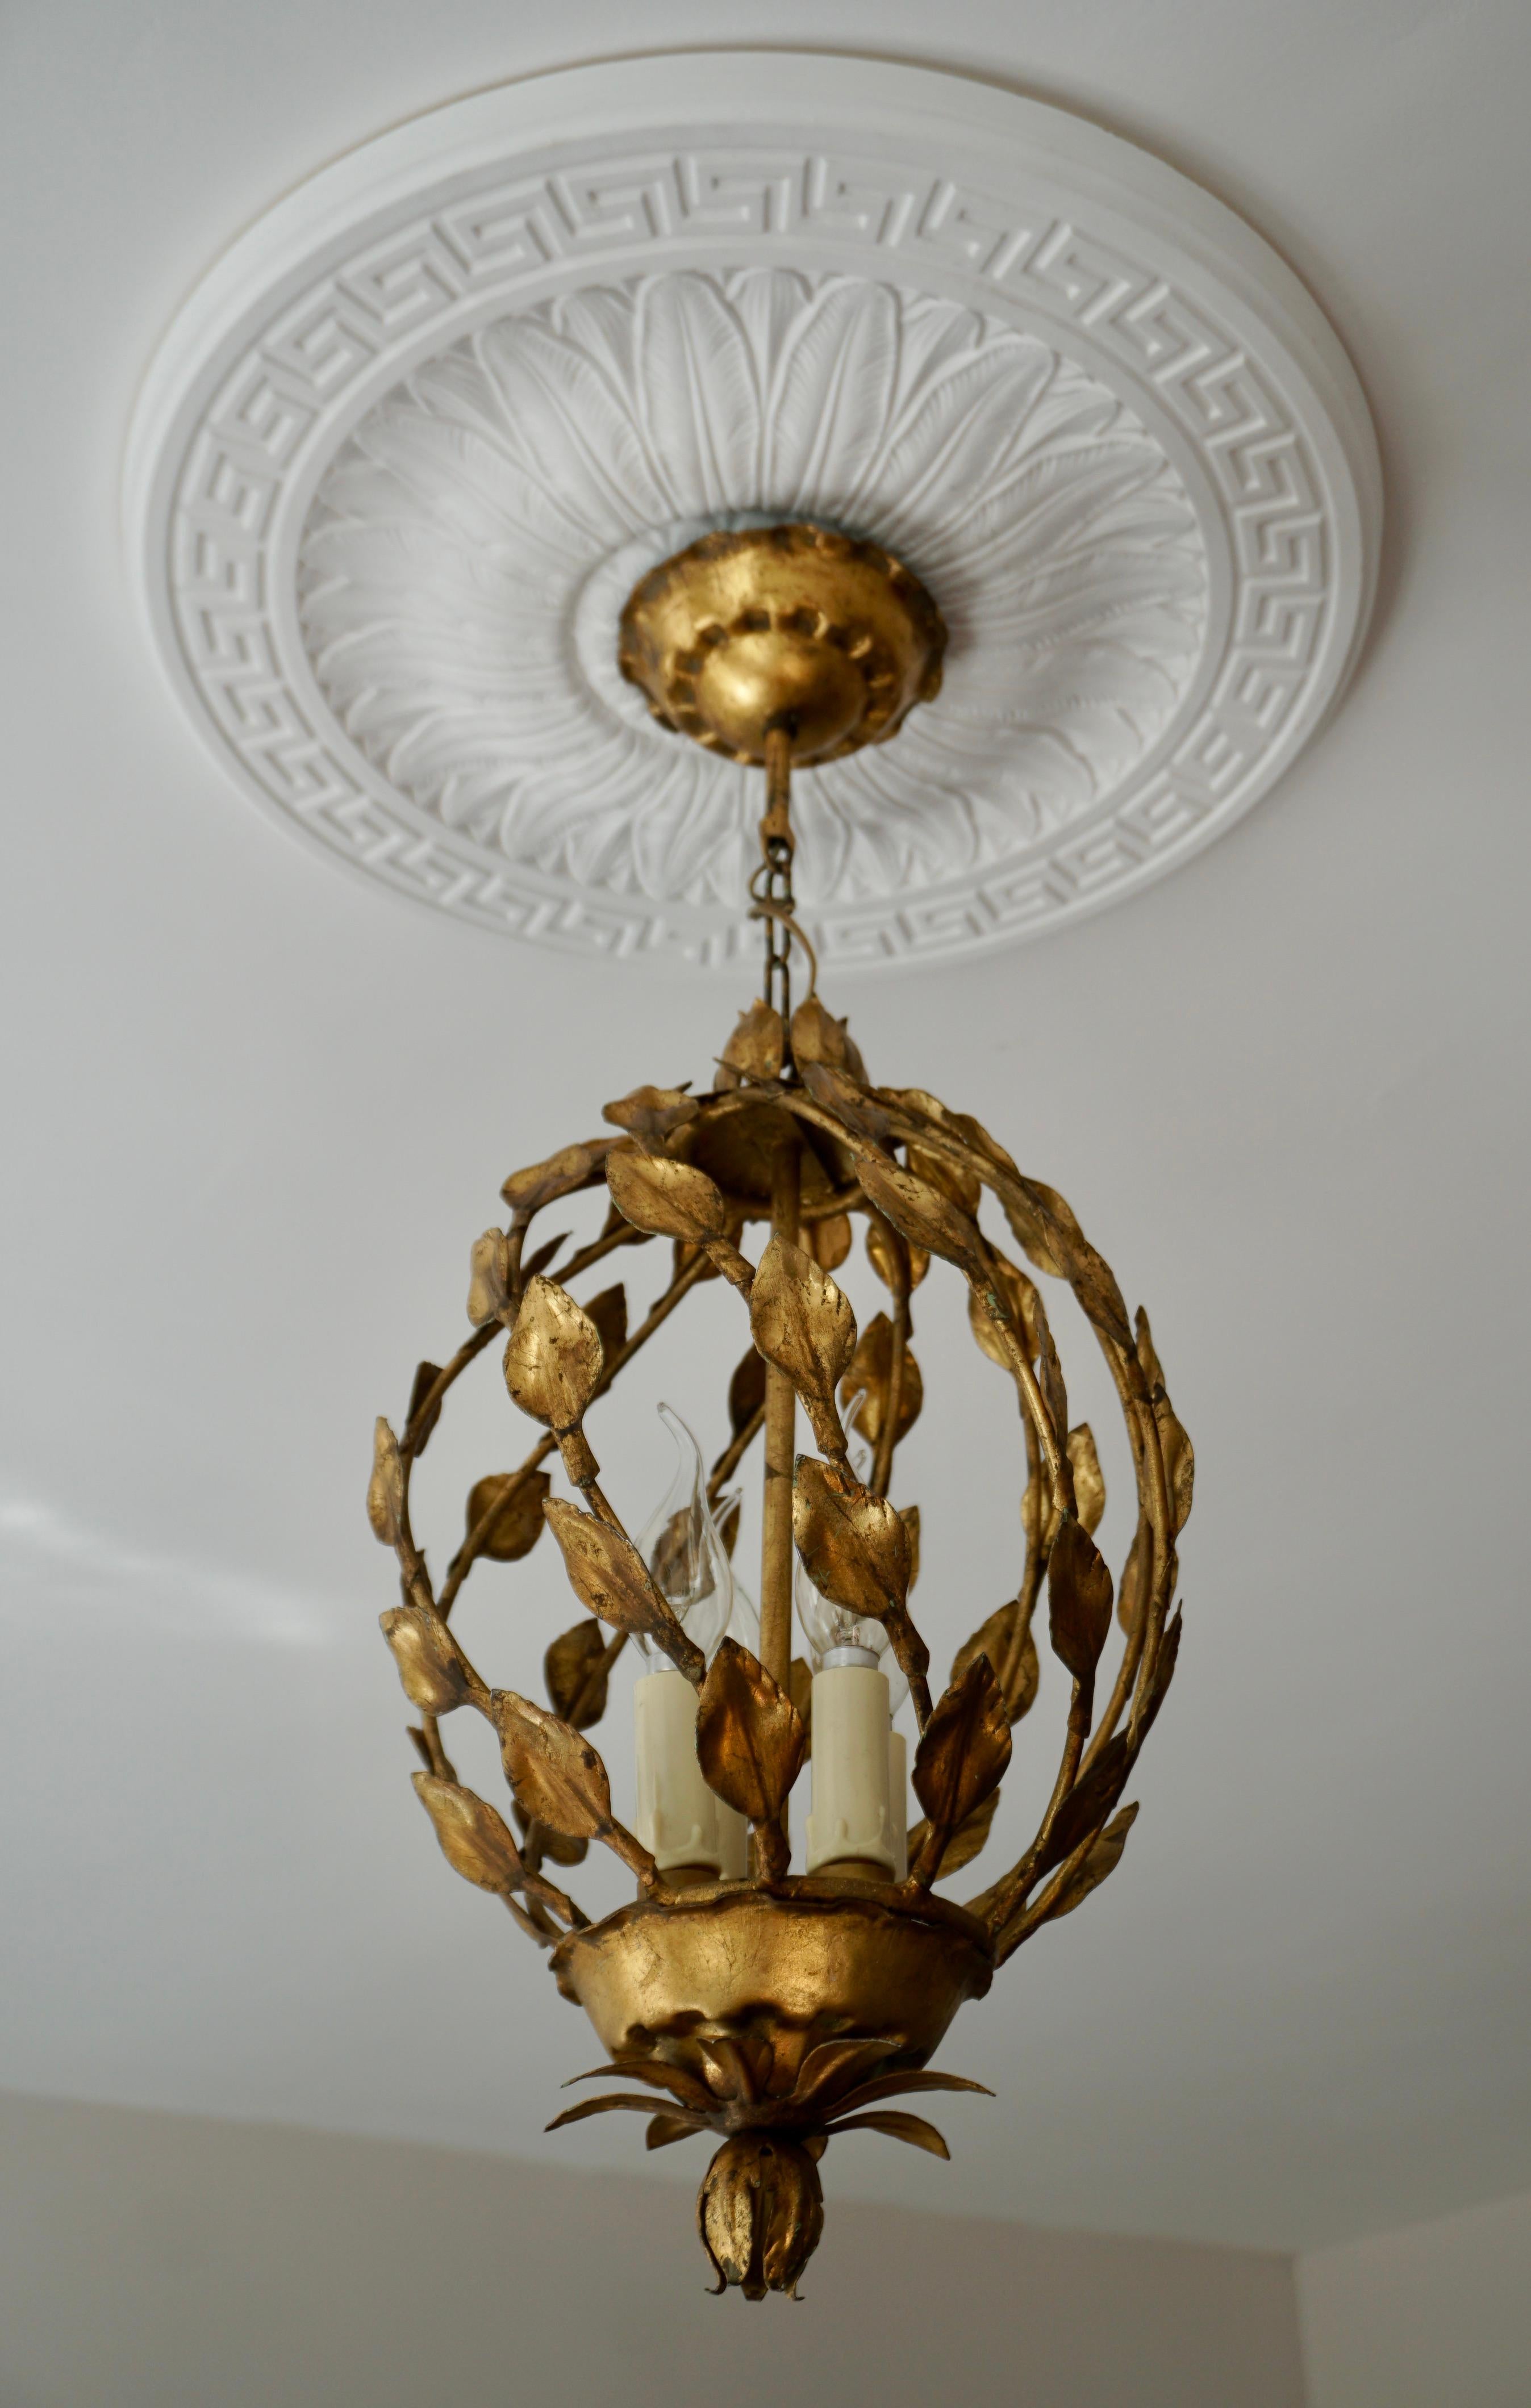 A Hollywood Regency style four-light gilt metal chandelier with tôle palm fronds.In working order.
Very good original vintage condition. 

Diameter 11